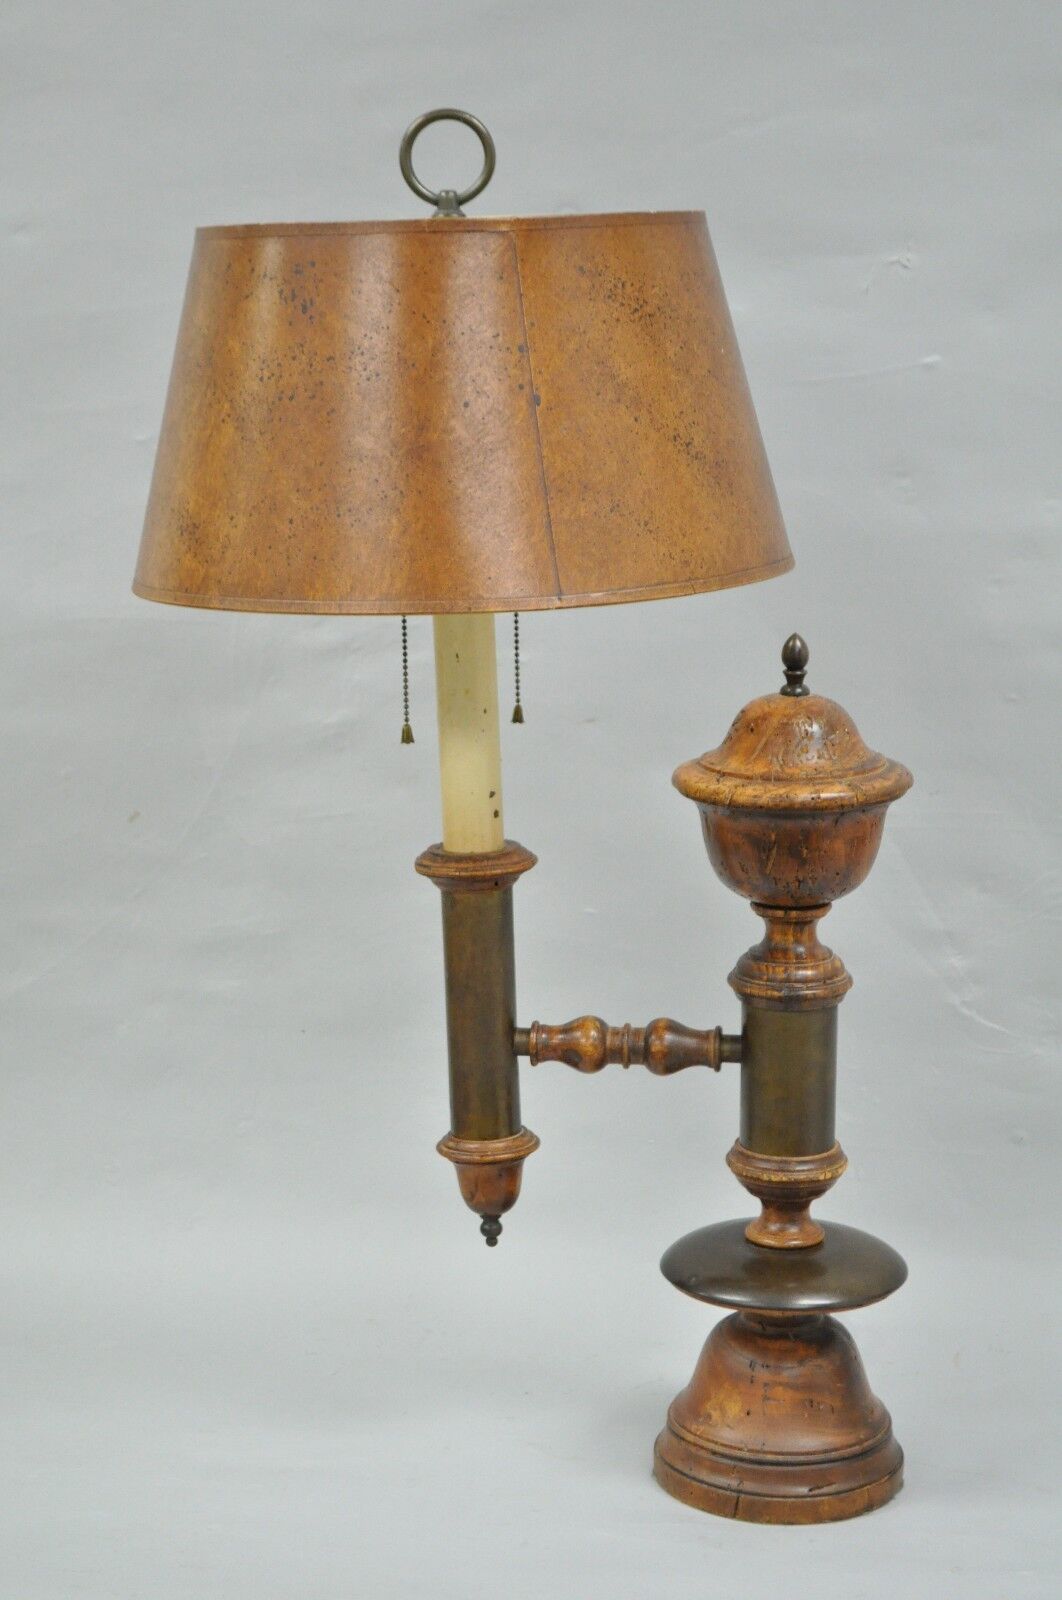 Vintage Distressed Wood & Brass French Country Rustic Table Desk Bouillotte Lamp